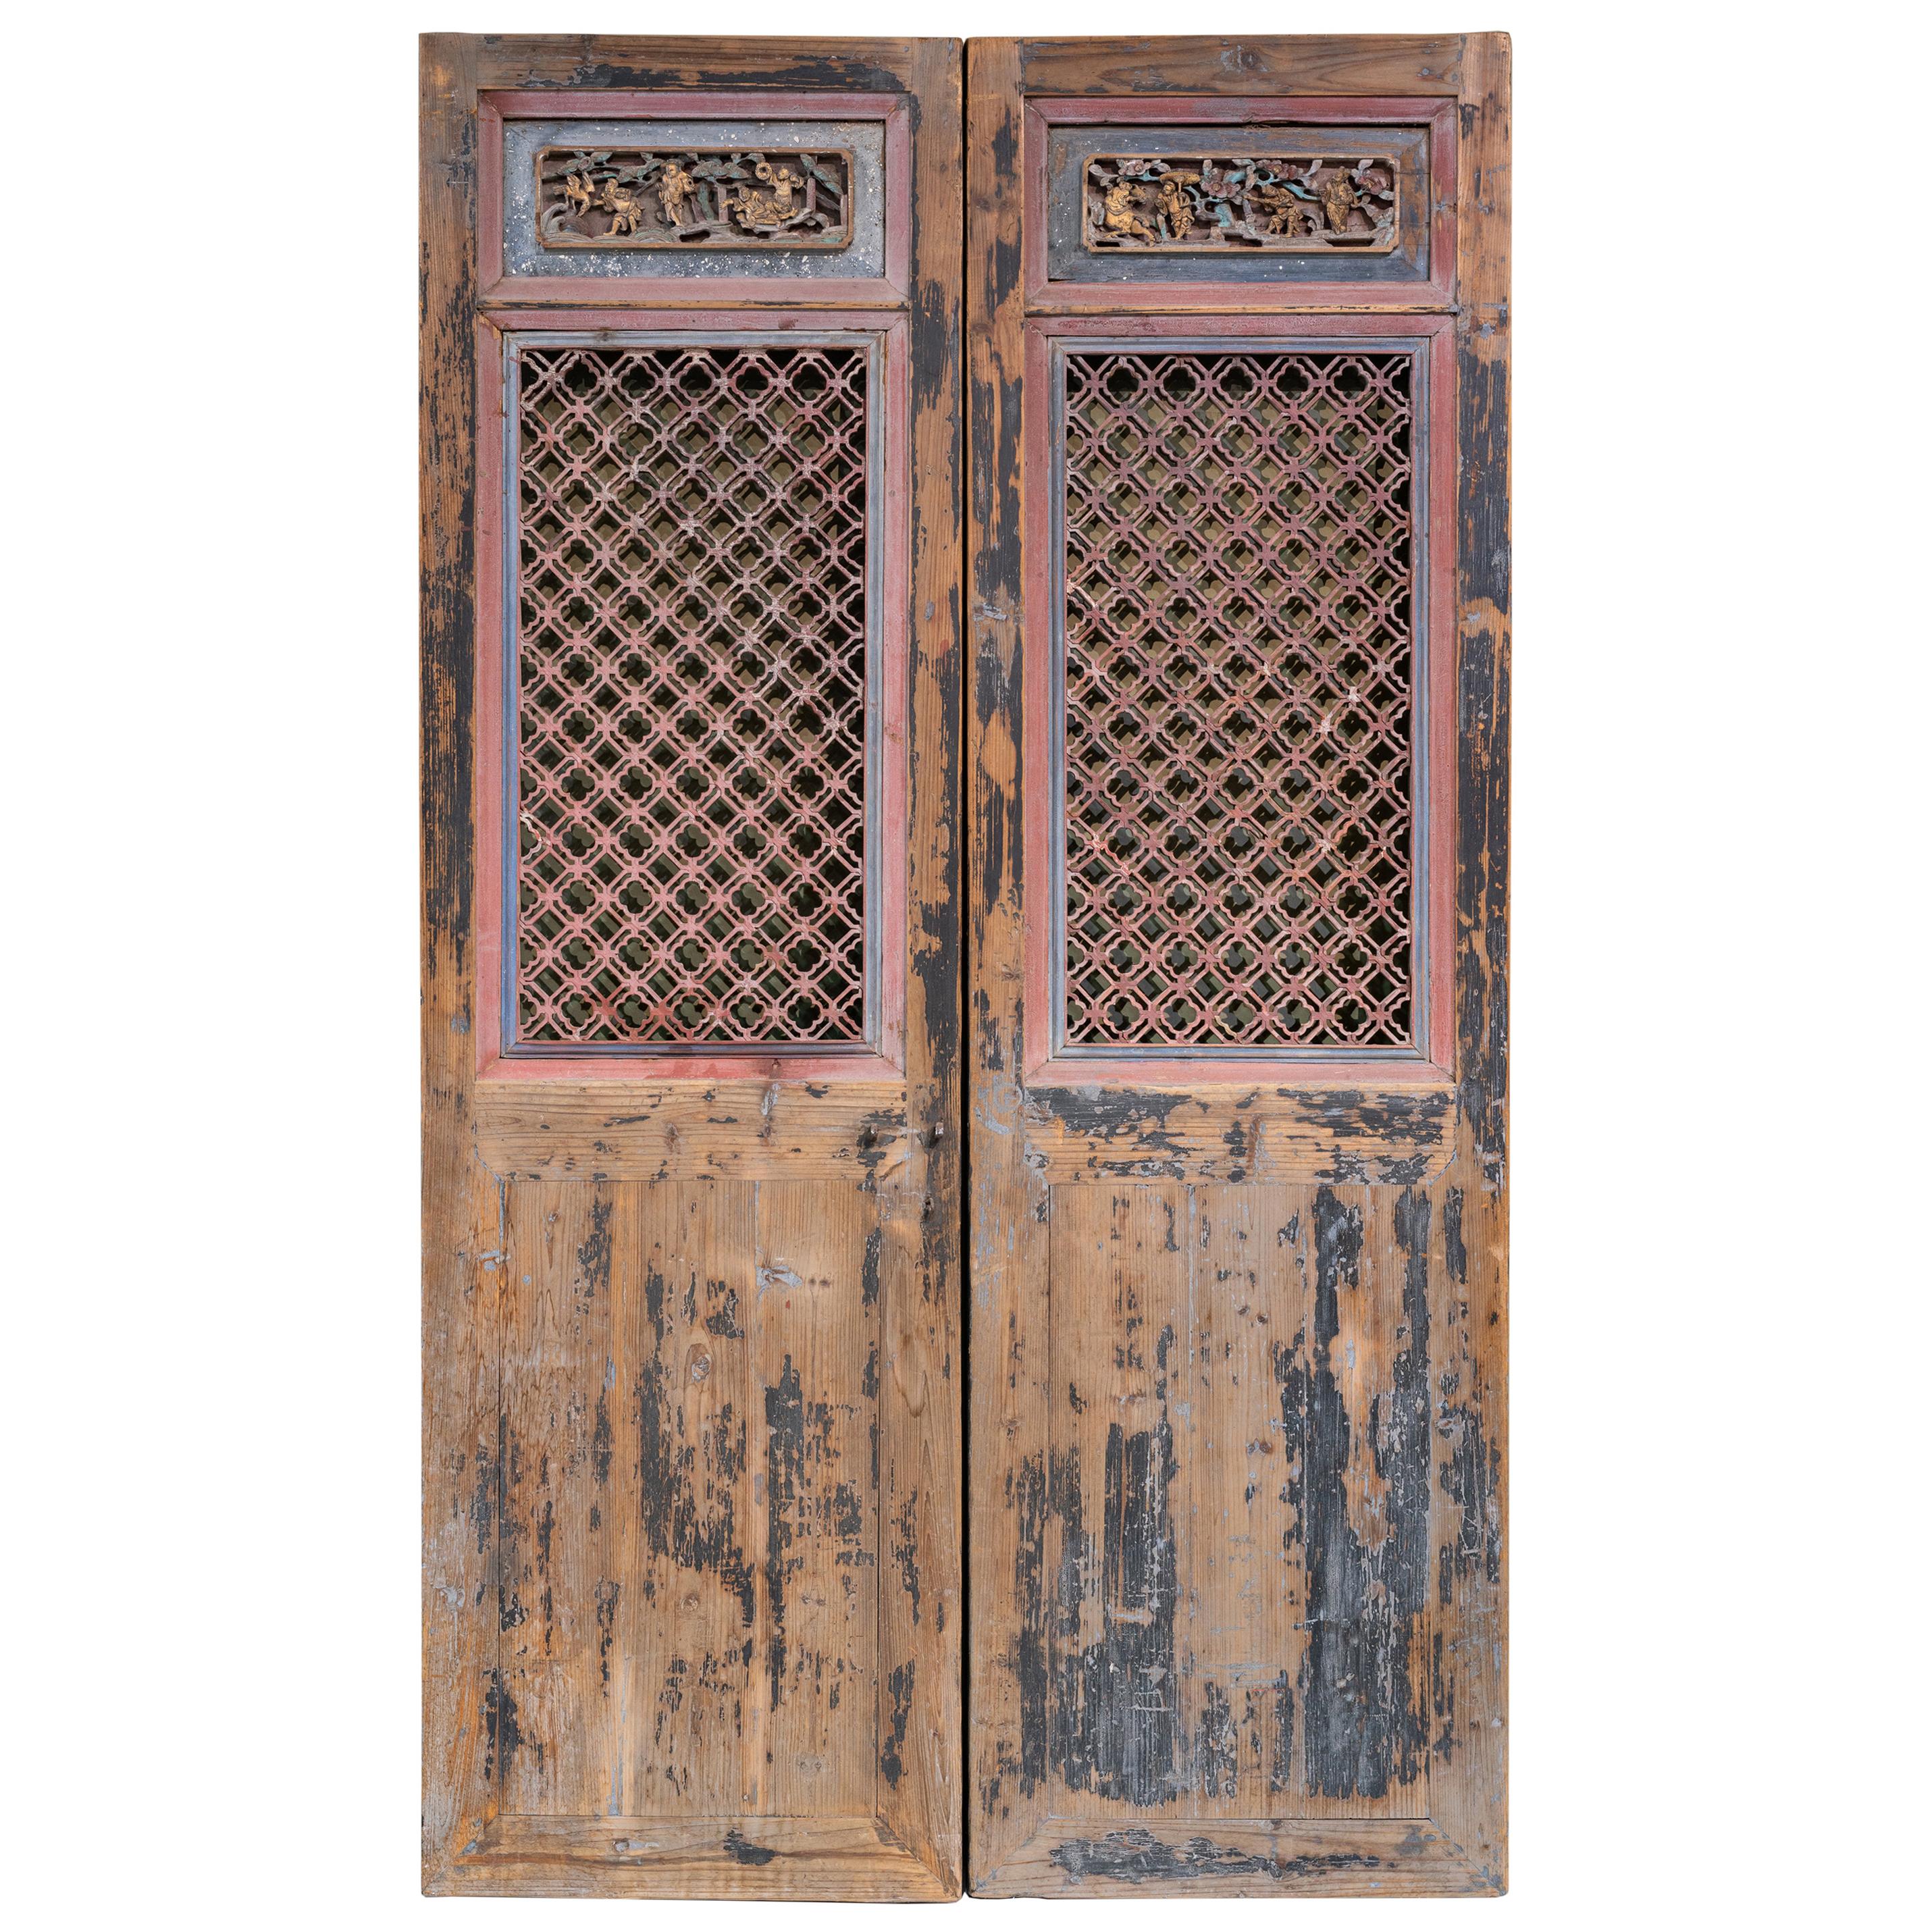 Late 19th Century Door Panels with Carvings and Lattice Patterns